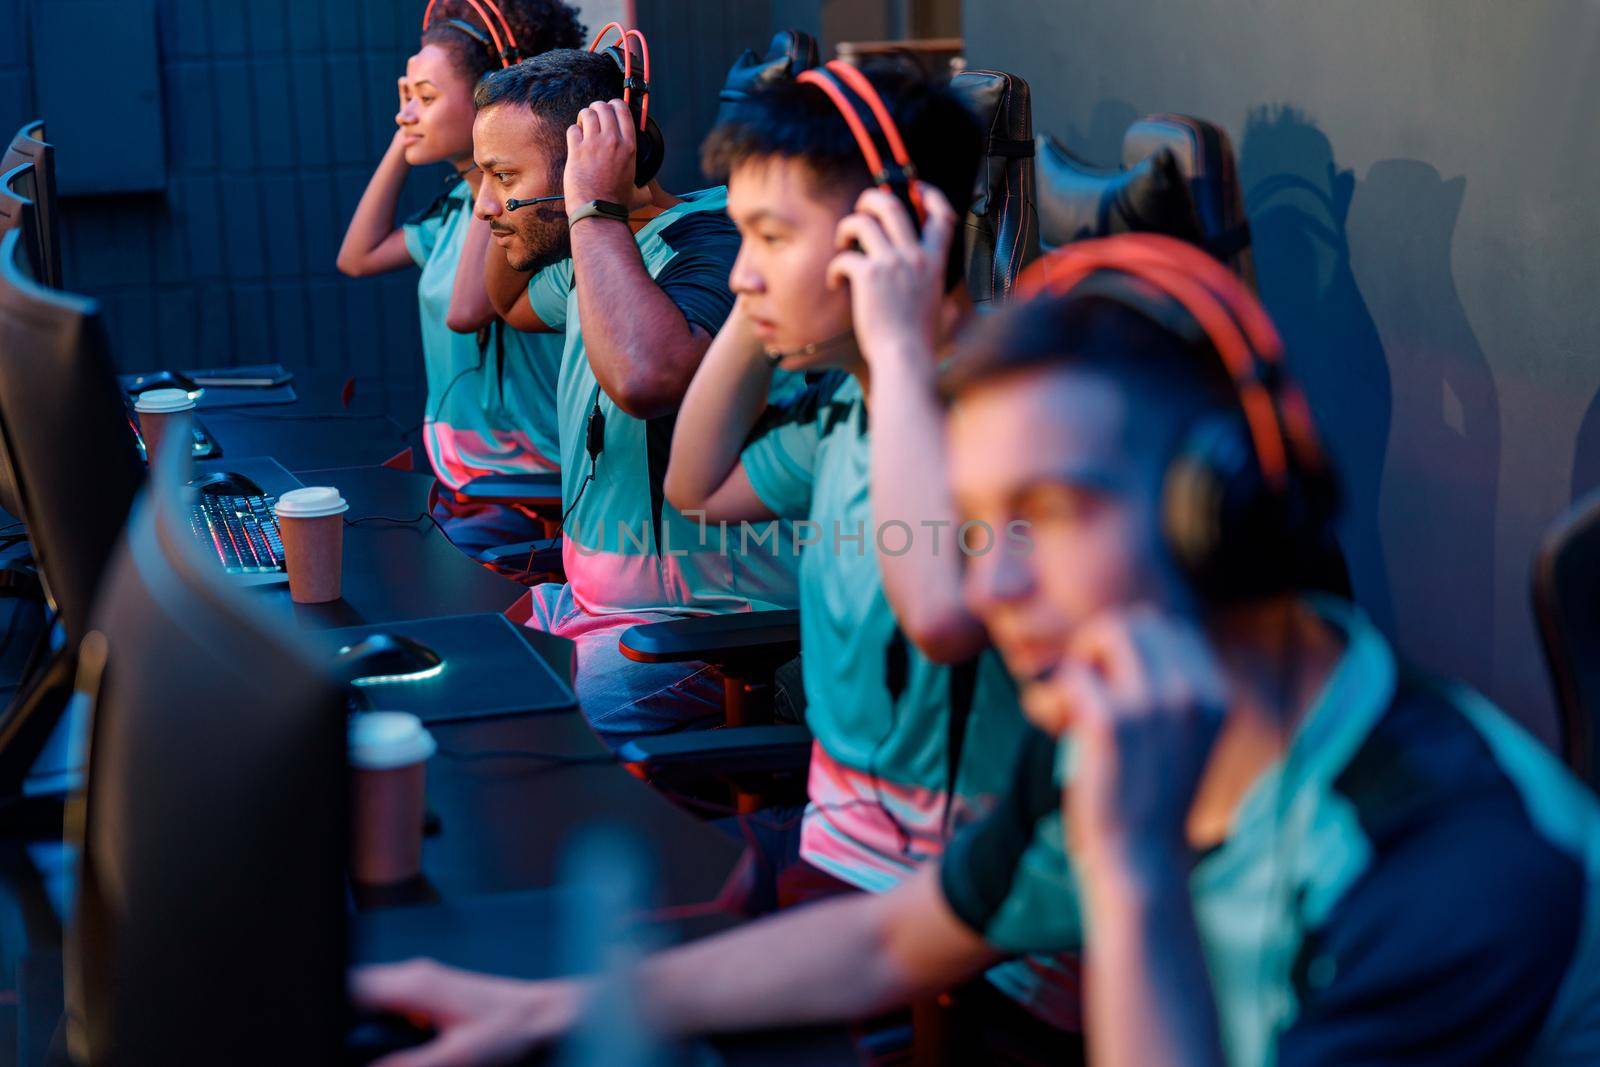 Group of three men and one woman sitting at computers putting on headphones and starting playing game in cyber club